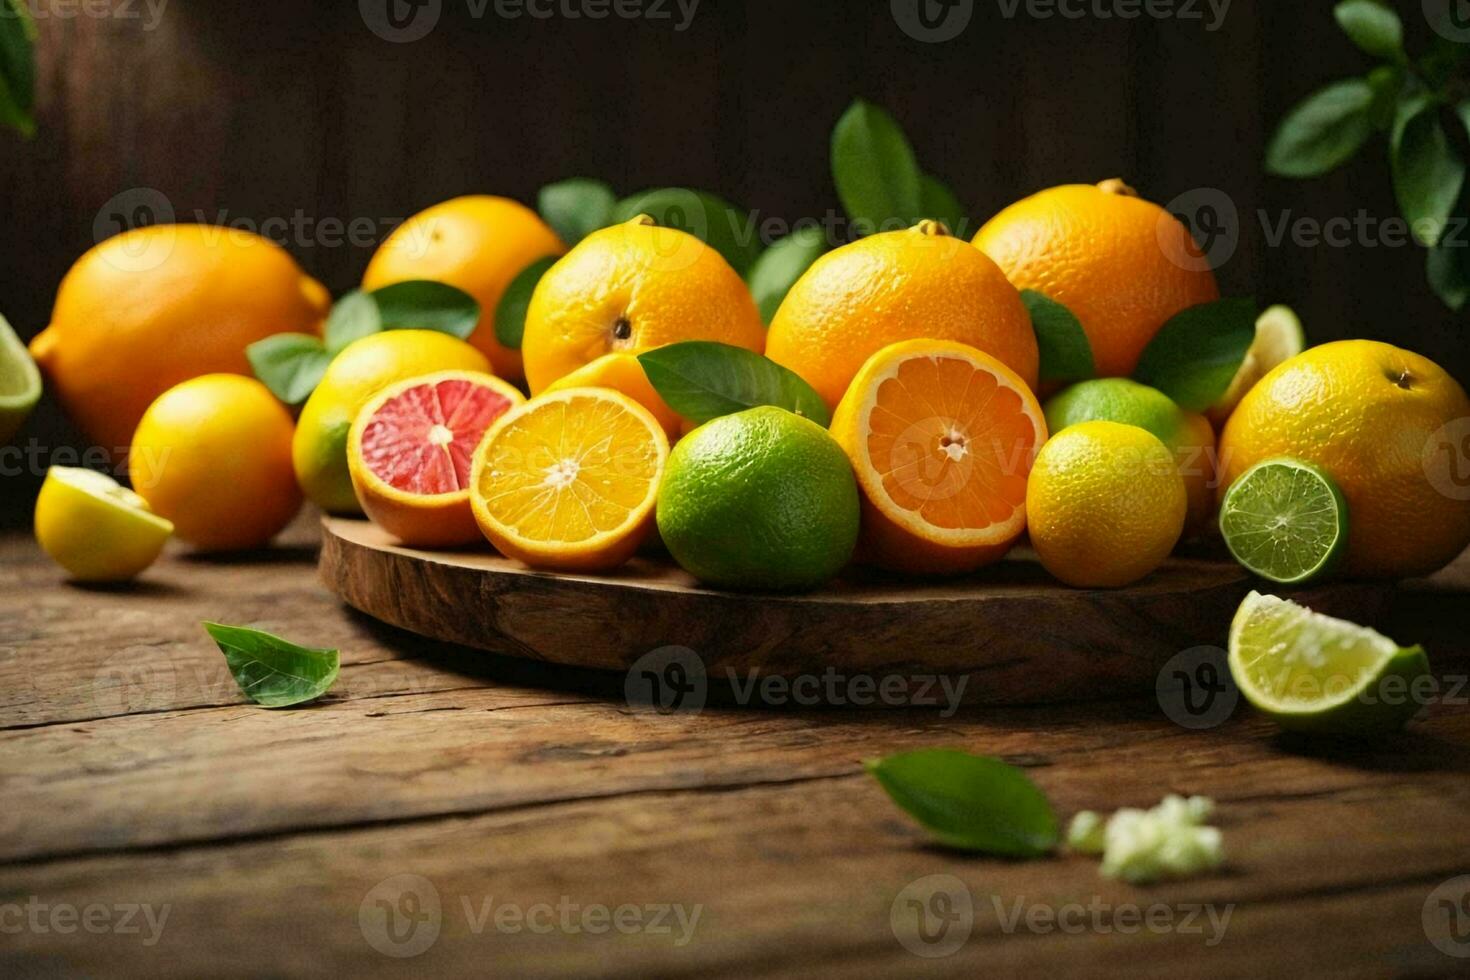 Food Photography of a vibrant collection of citrus fruits, including oranges, lemons, and grapefruits. photo